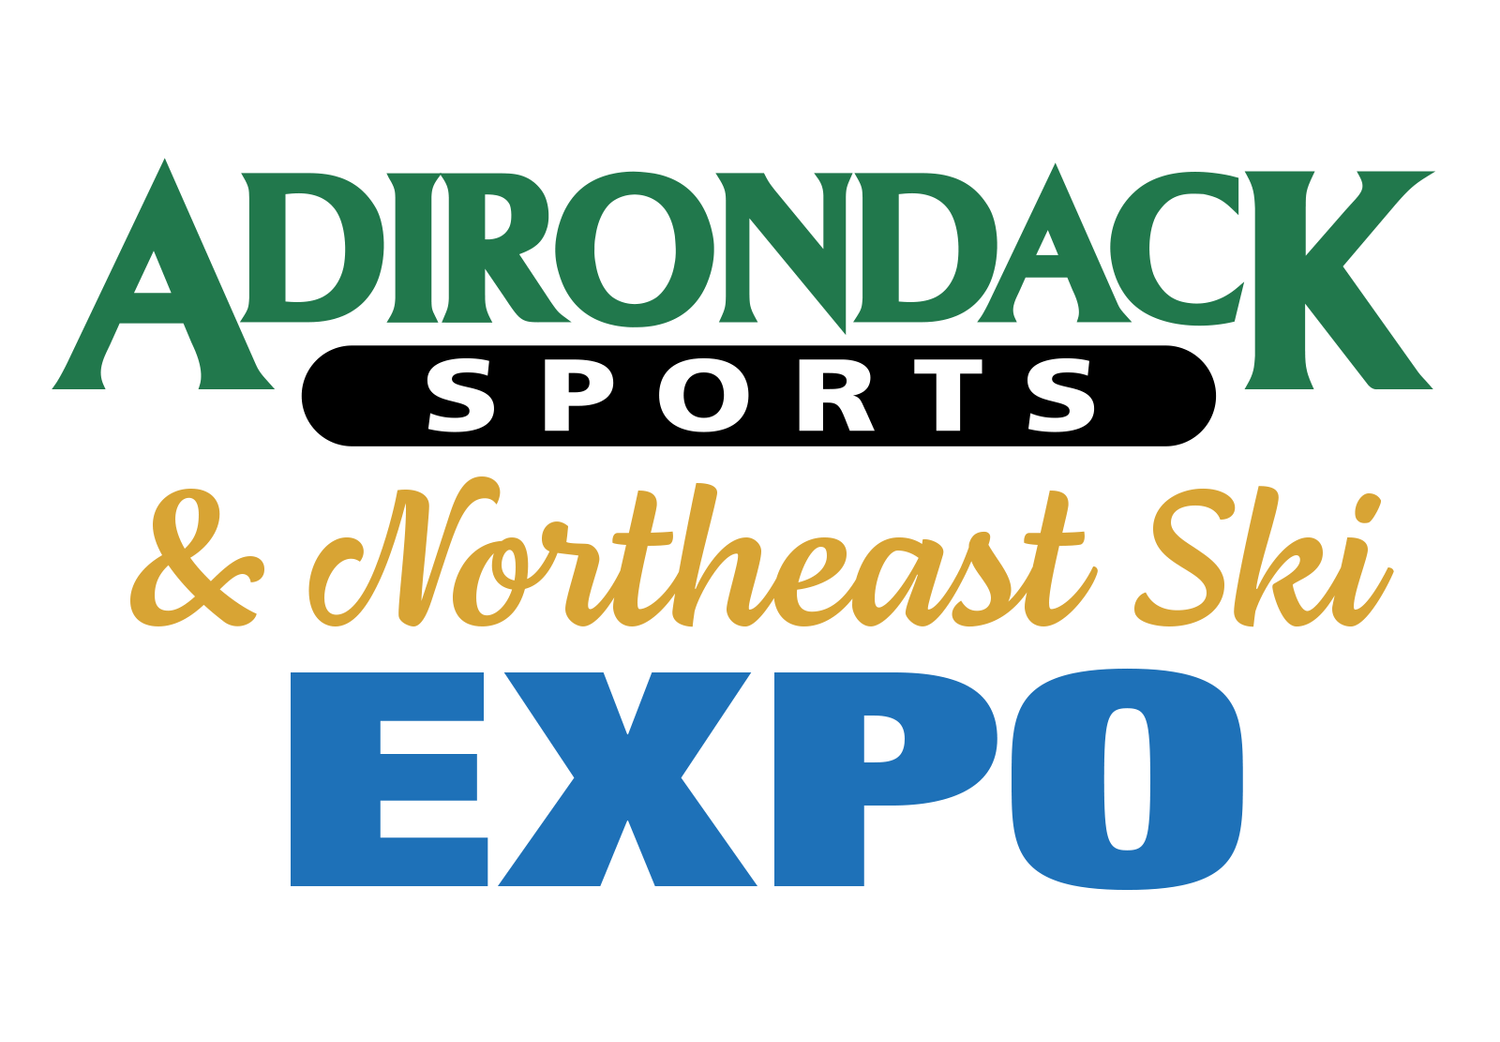 Image for Adirondack Sports & Northeast Ski Expo Celebrating 60th Anniversary with a Huge Variety of Outdoor Sports Exhibitors